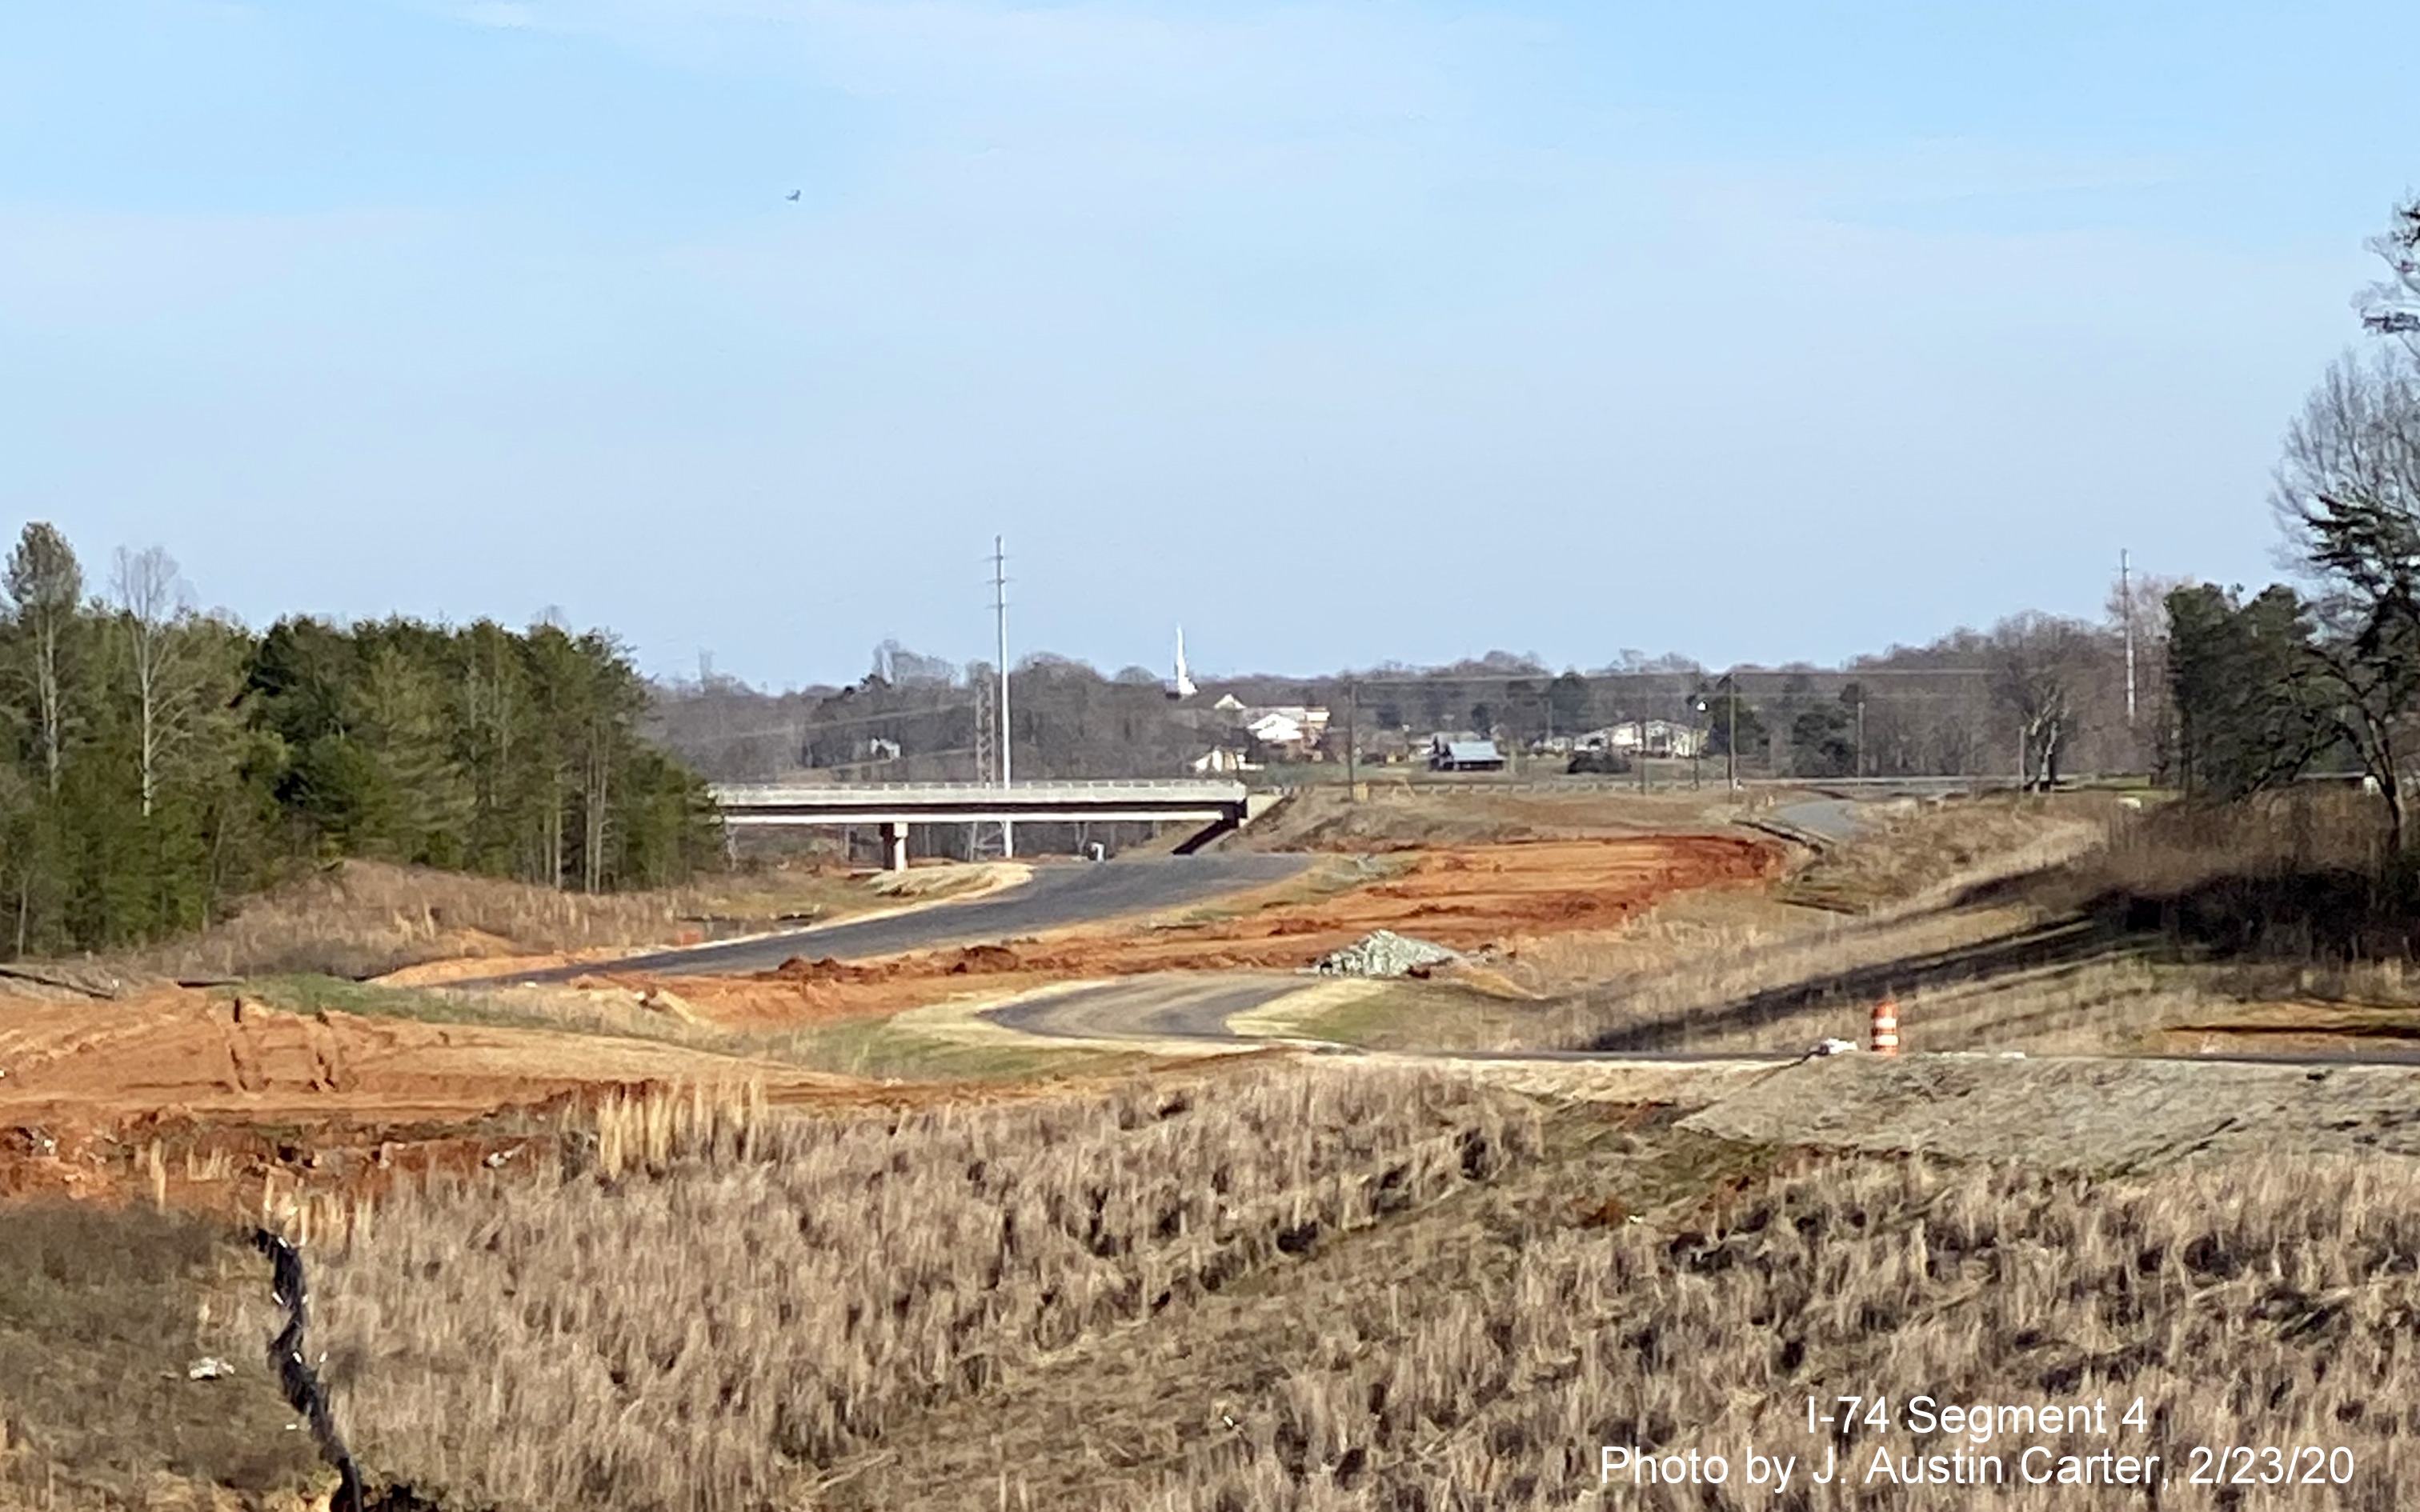 Image of construction of future I-74/Winston-Salem Beltway looking southeast from
        US 311 toward US 158, by J. Austin Carter in Feb. 2020